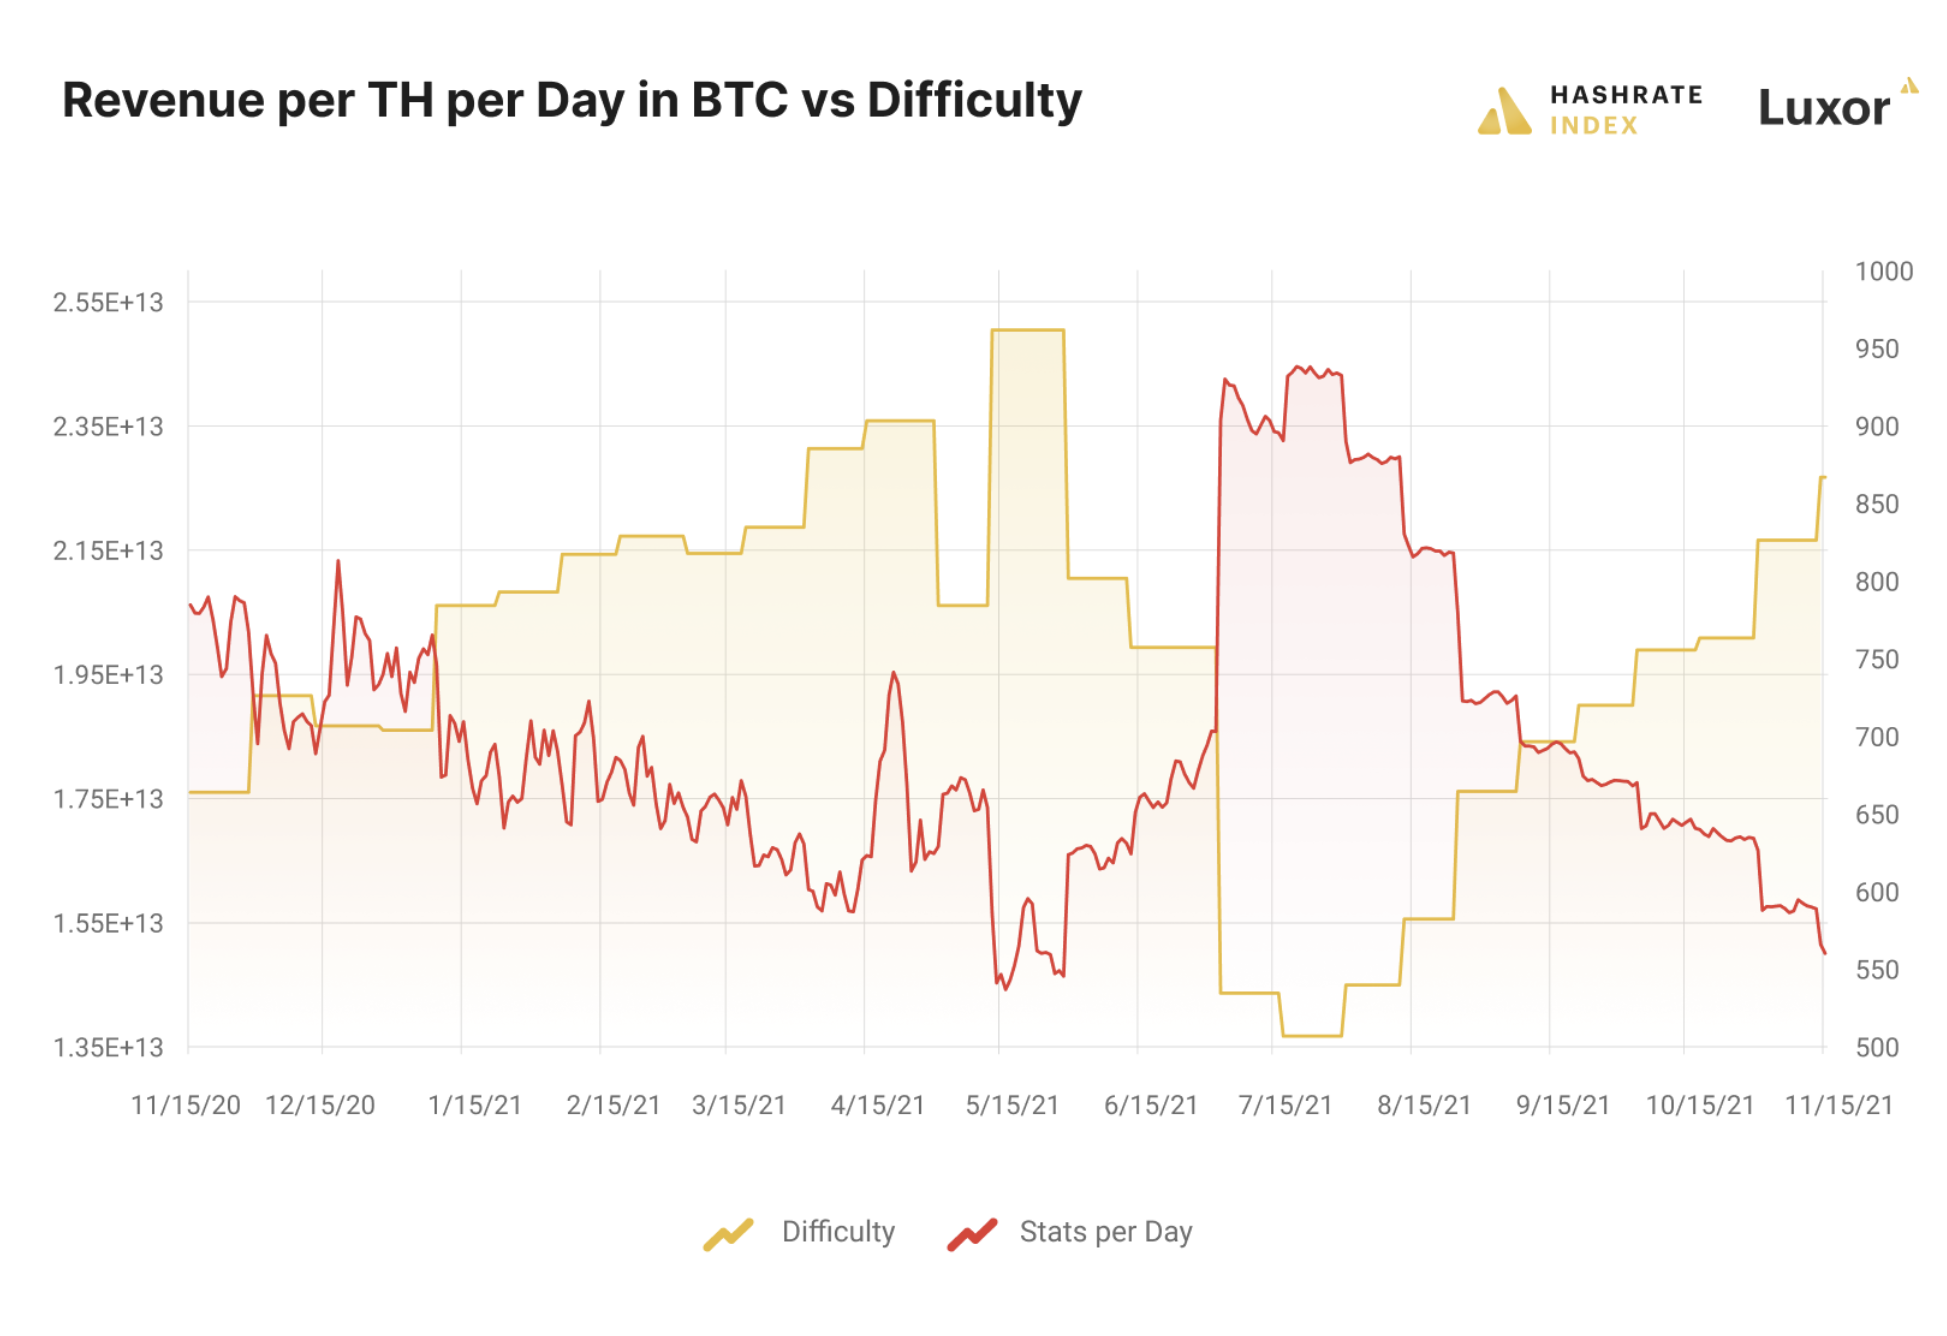 Bitcoin profitability in BTC is inversely correlated with Bitcoin's difficulty adjustment